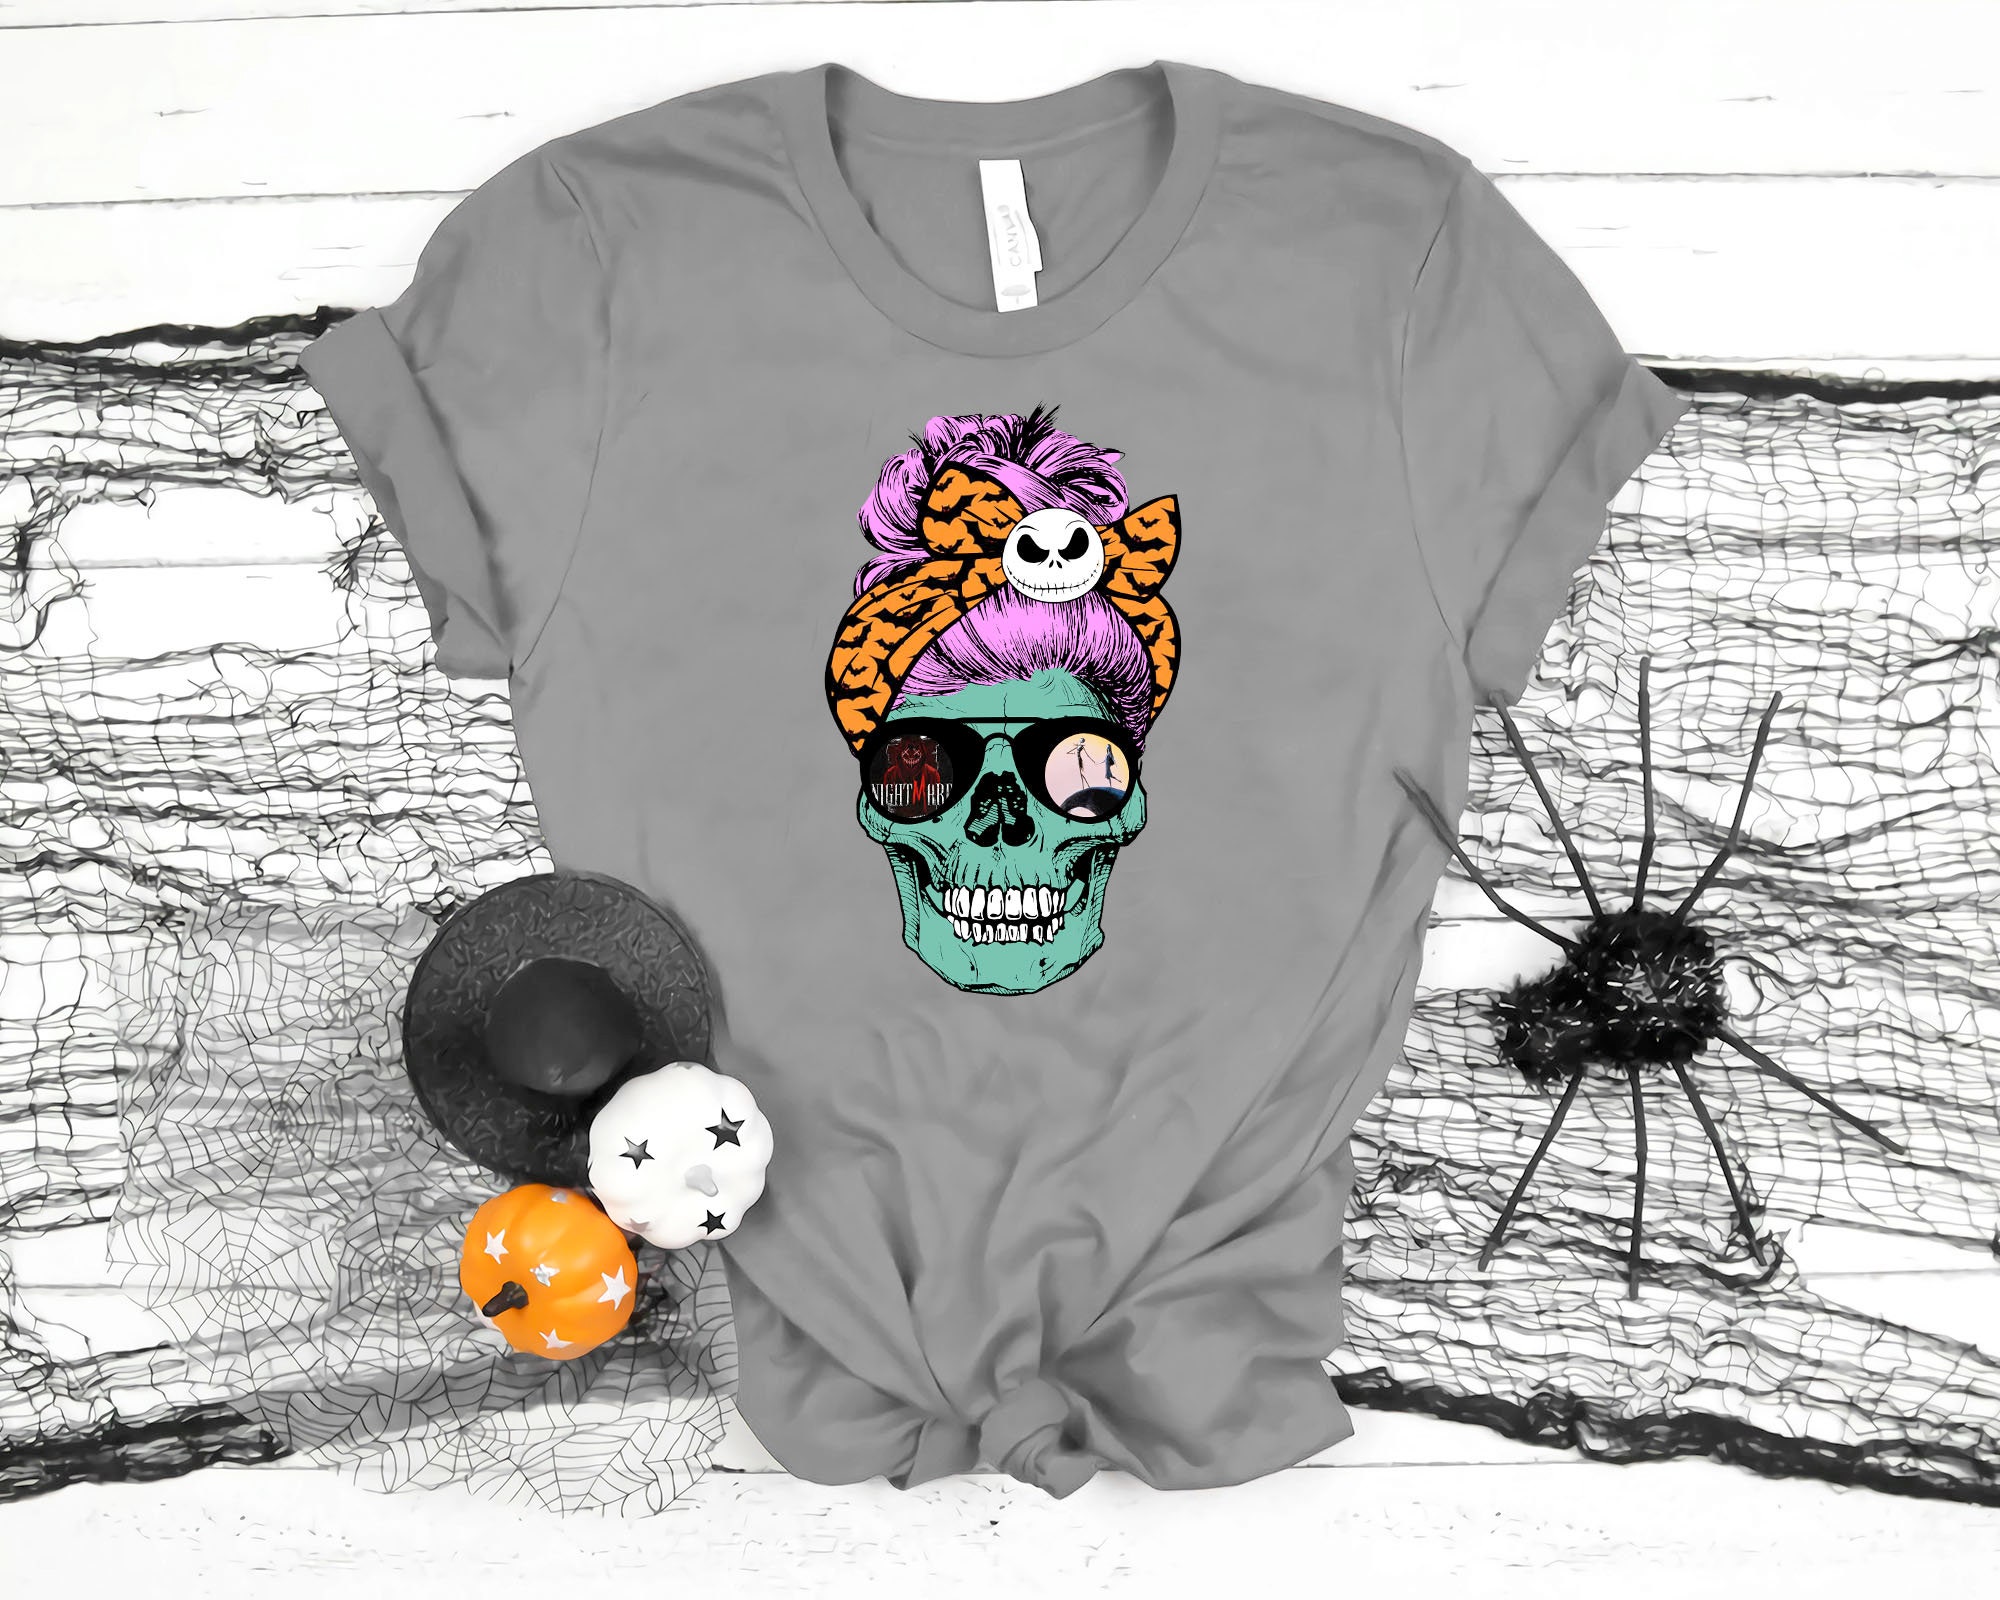 Skull Face With Sunglasses Shirt